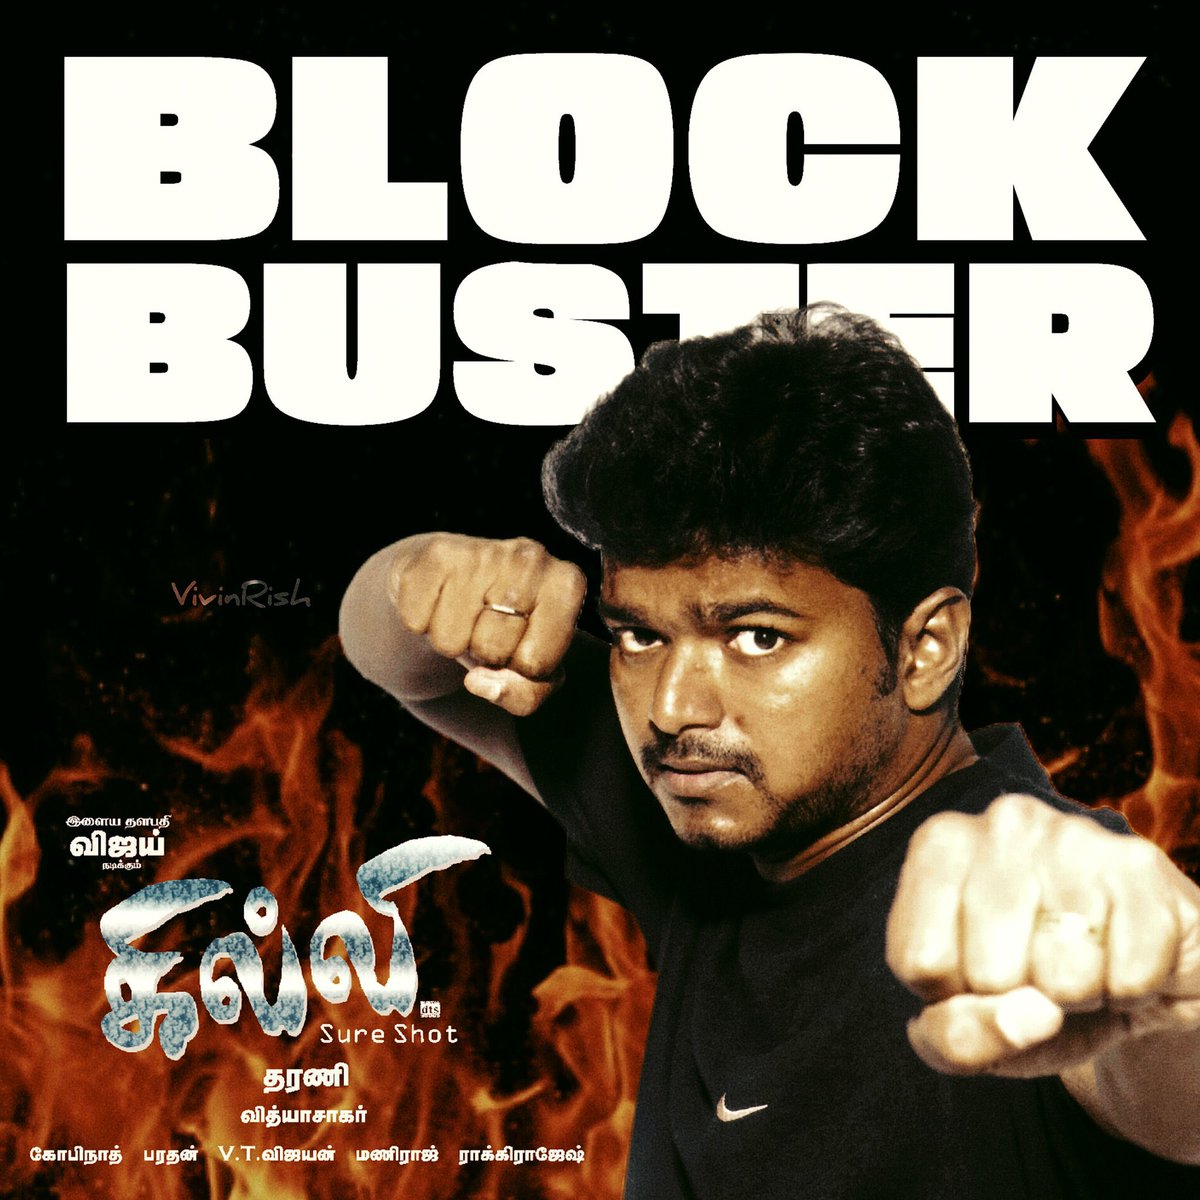 #Ghilli on its 12th day surpassed #Dheena and #Billa cumulative collection on the opening day in Tamil Nadu! 🔥 Being NO. 1 even in re-release!